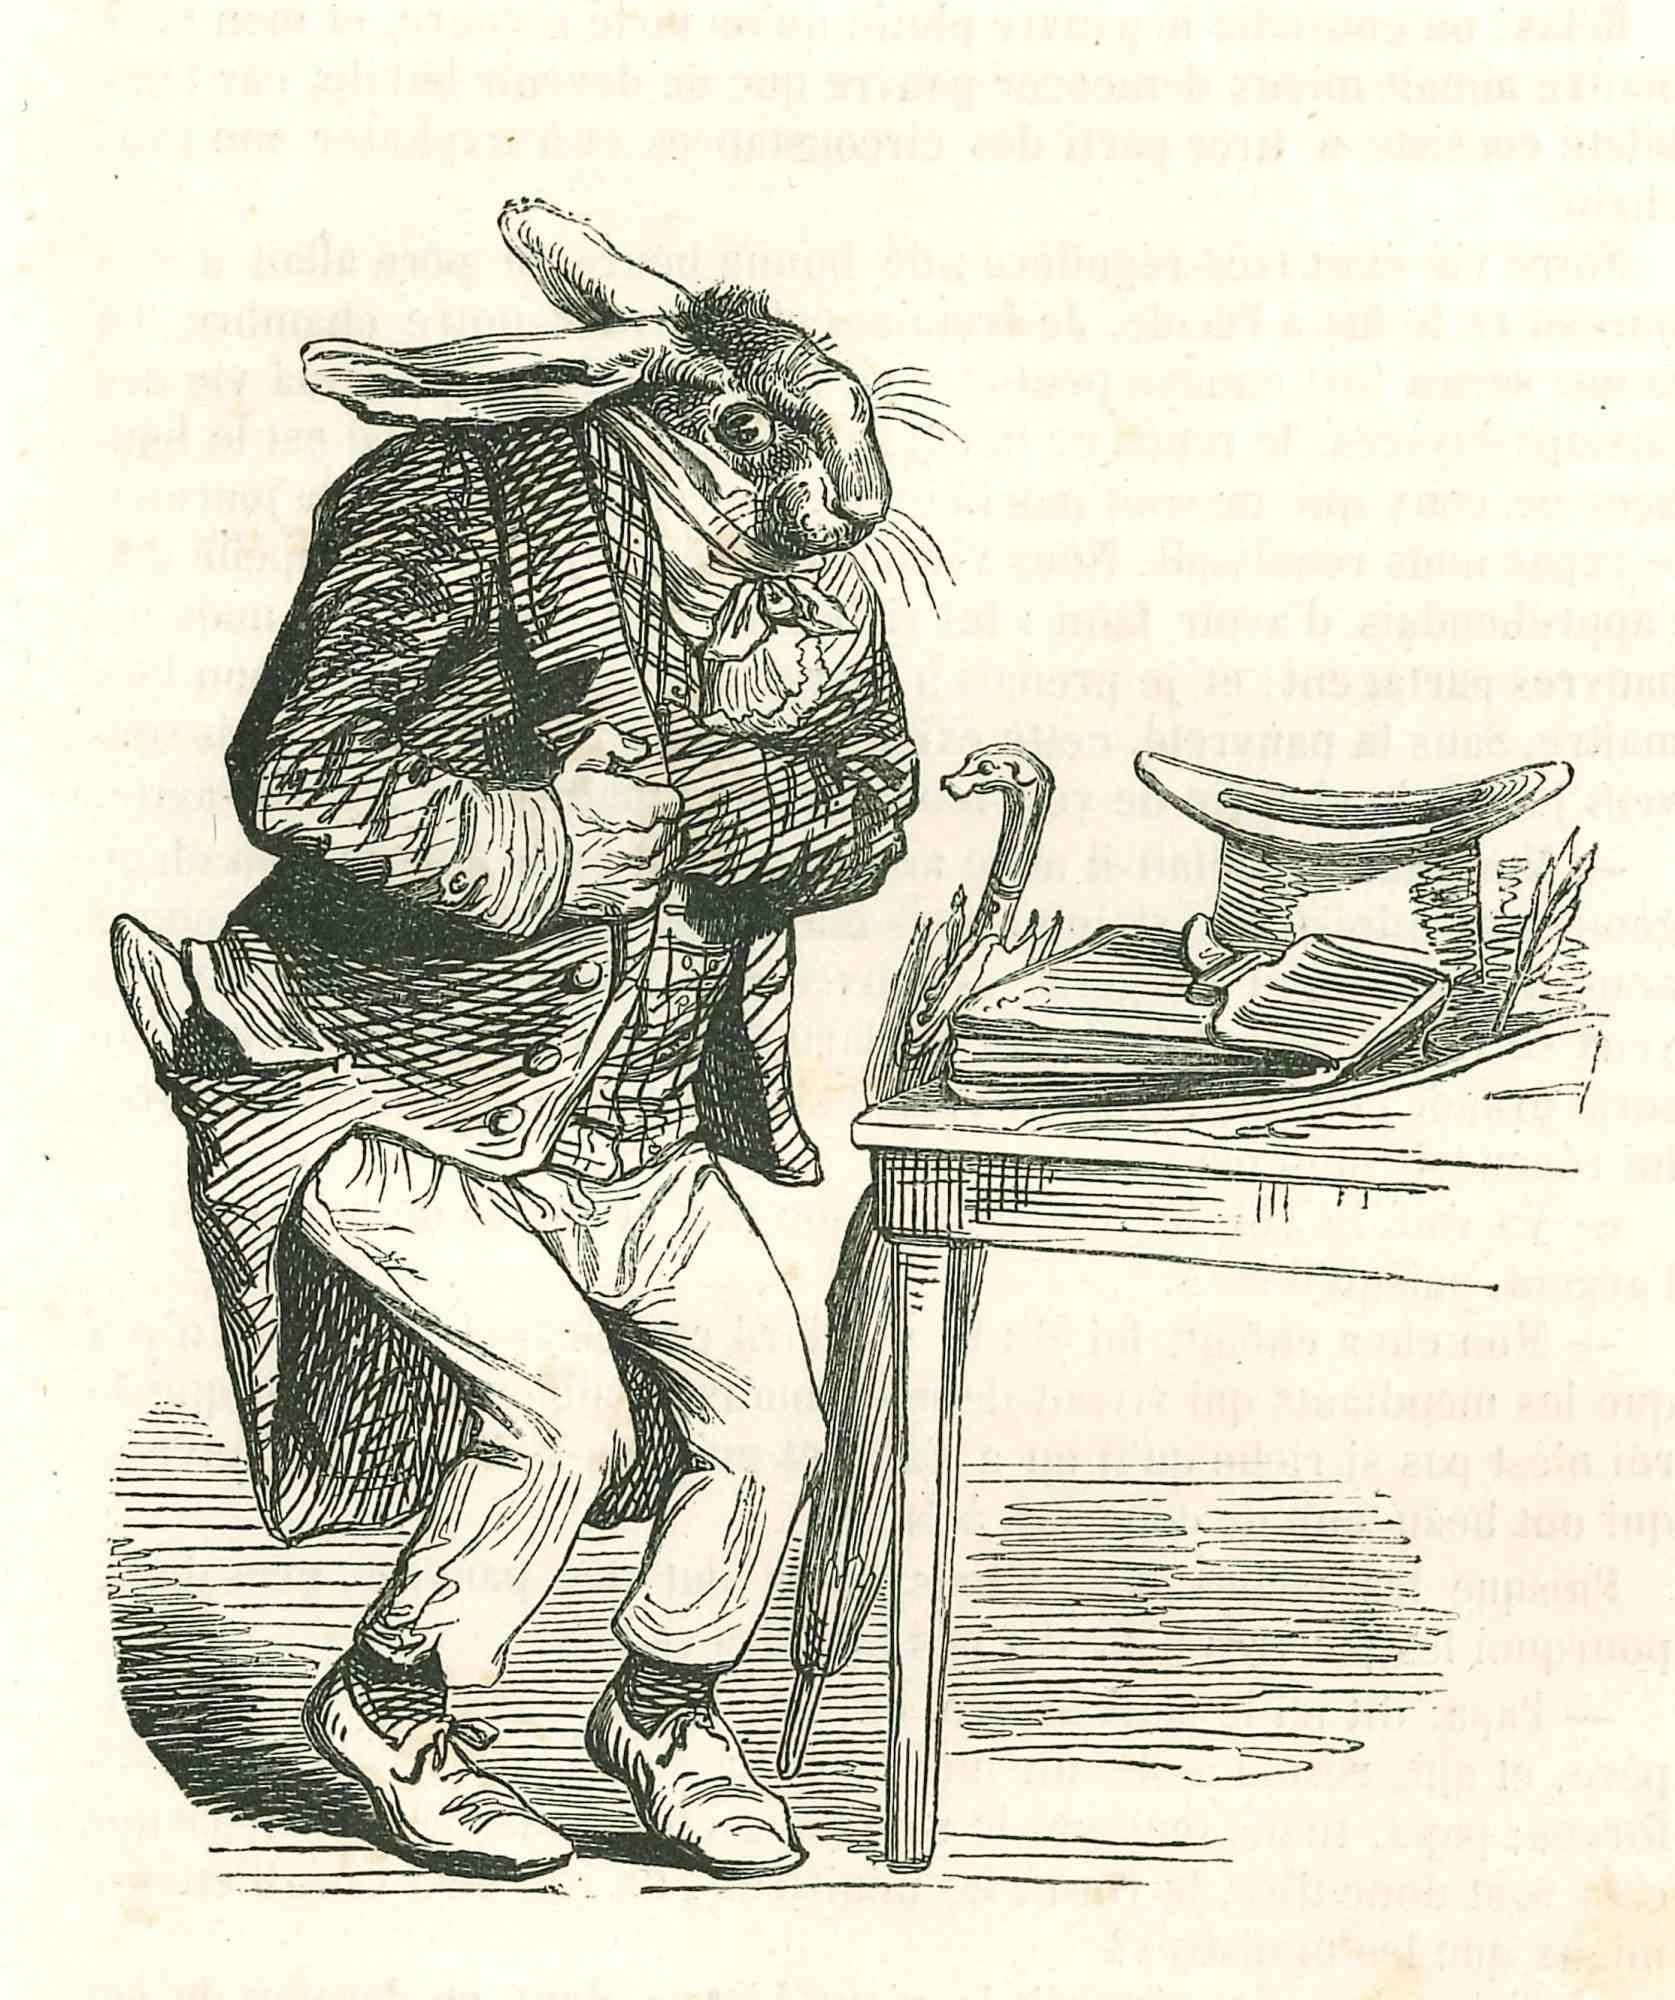 Jean Jeacques Grandville Animal Print - The Lawyer Bunny In A Hurry - Lithograph by J.J Grandville - 1852